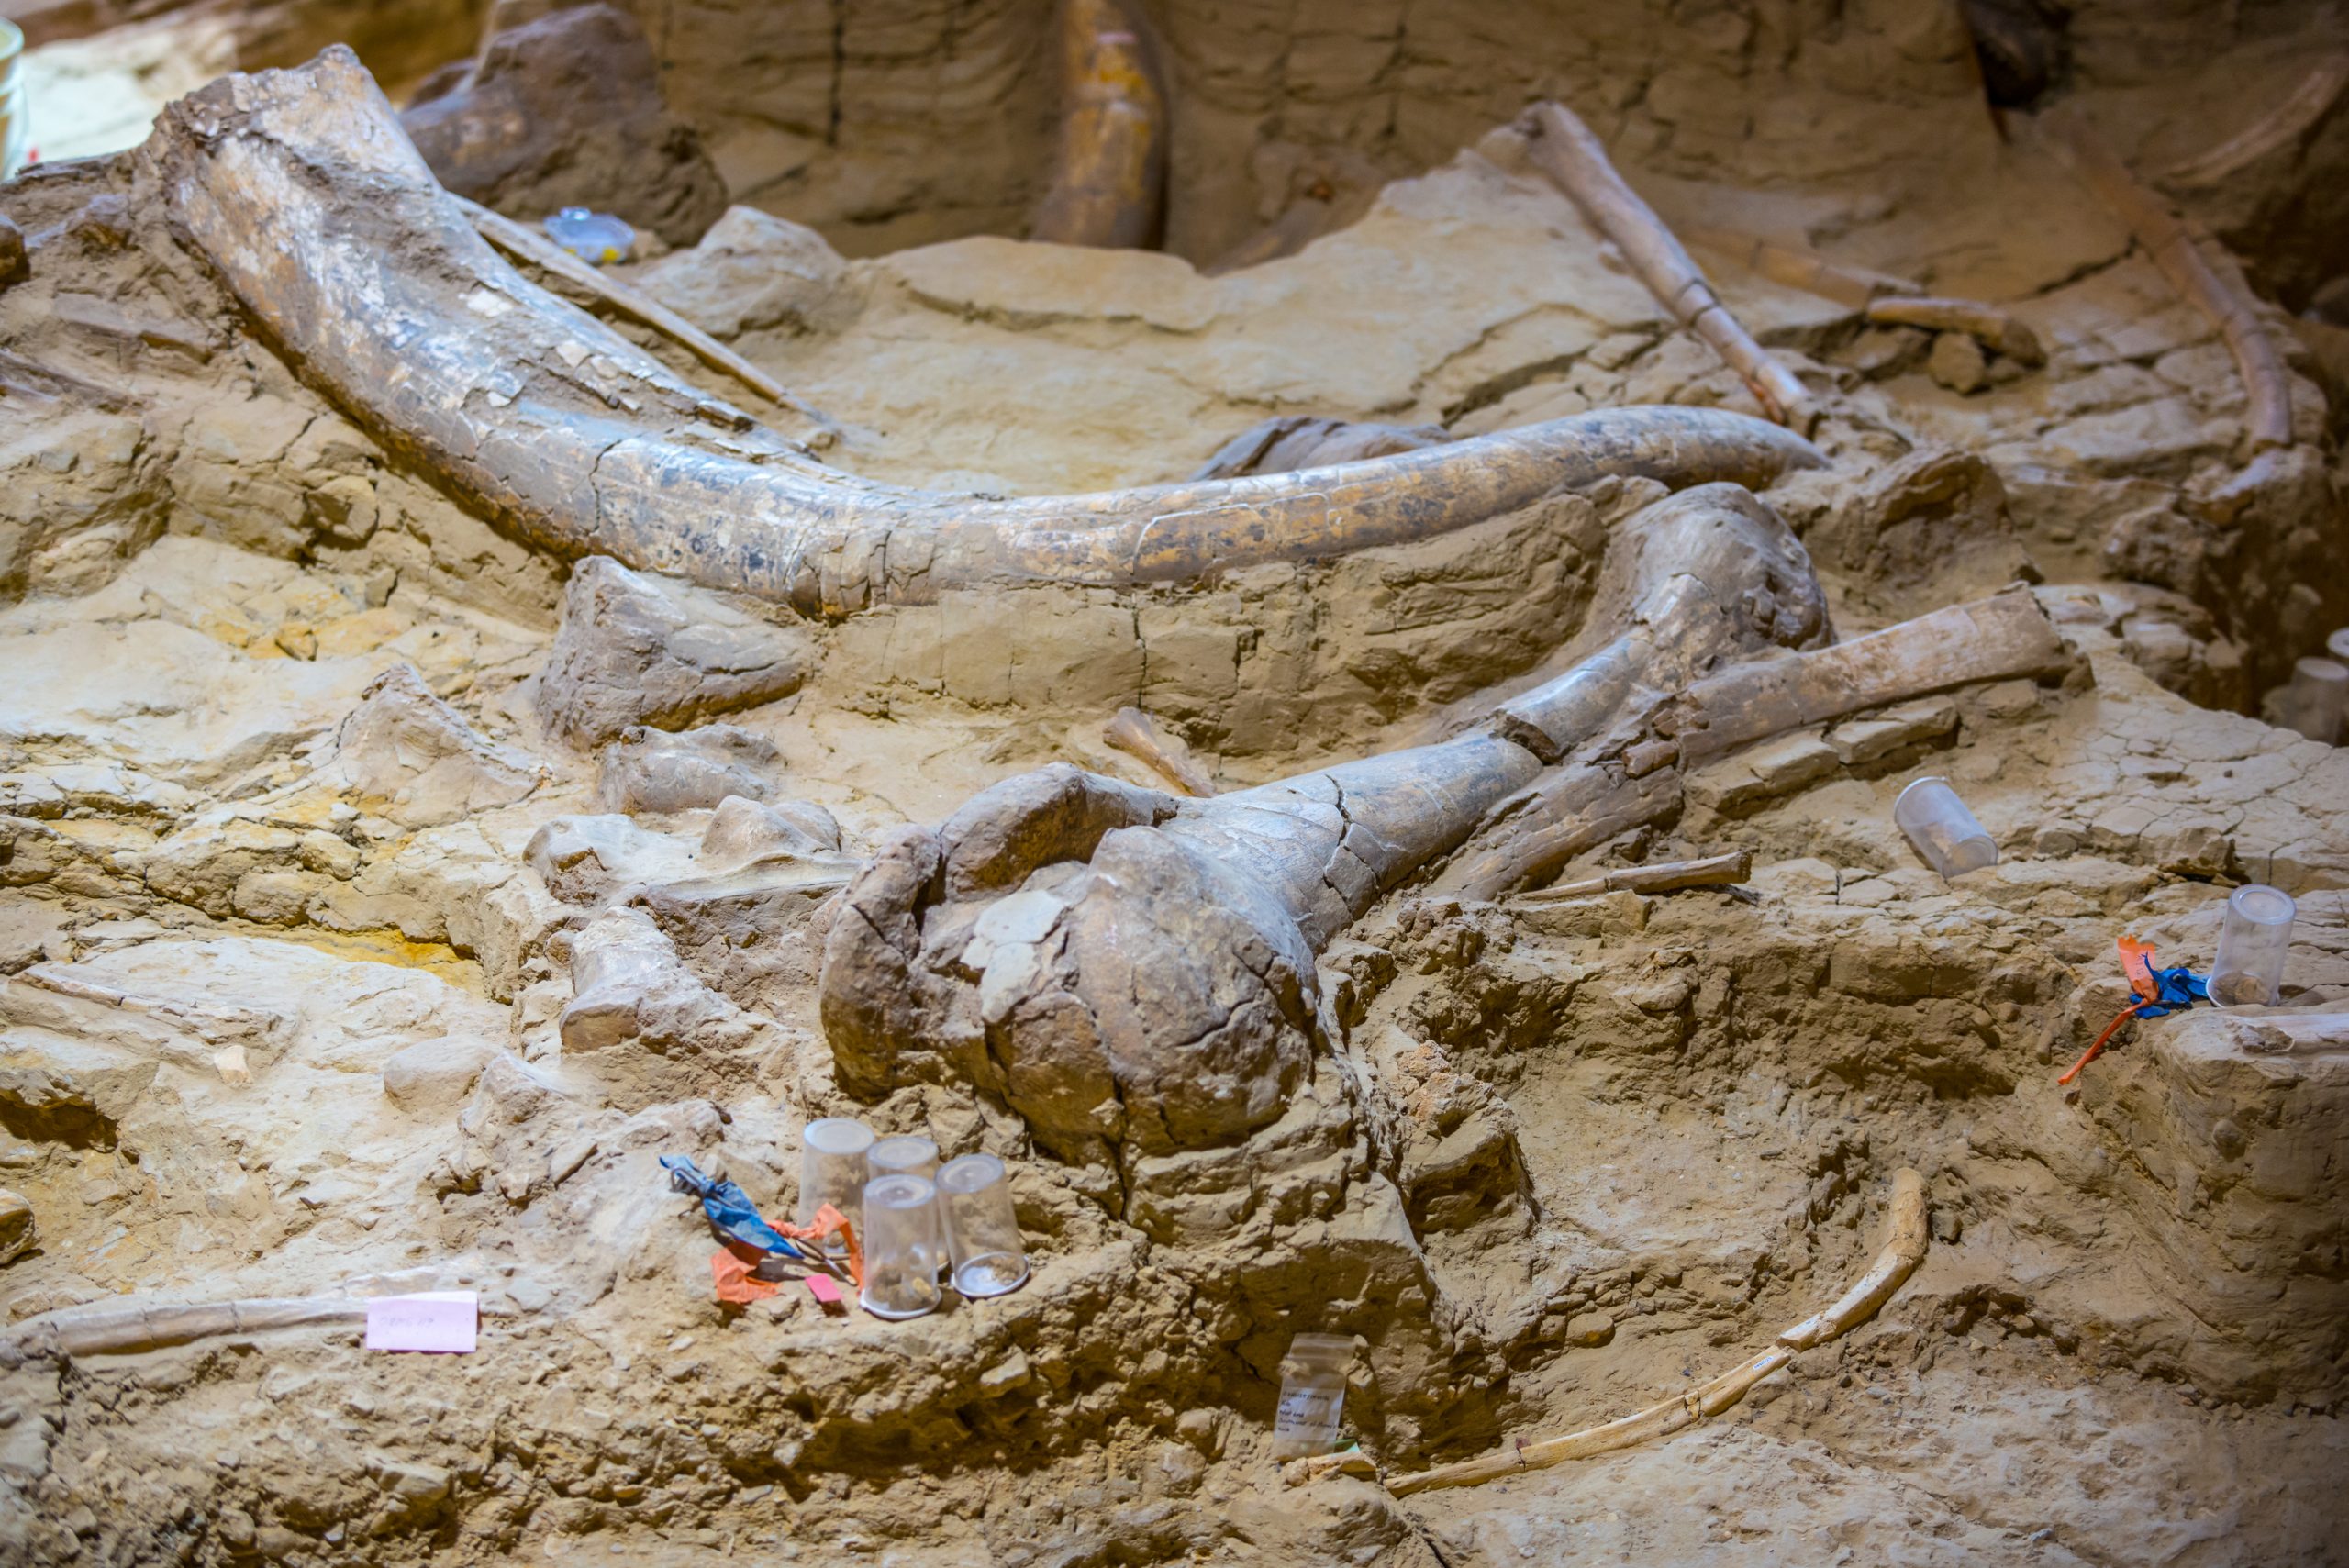 An image of an archaeological site showing mammoth bones in North America. Depositphotos.